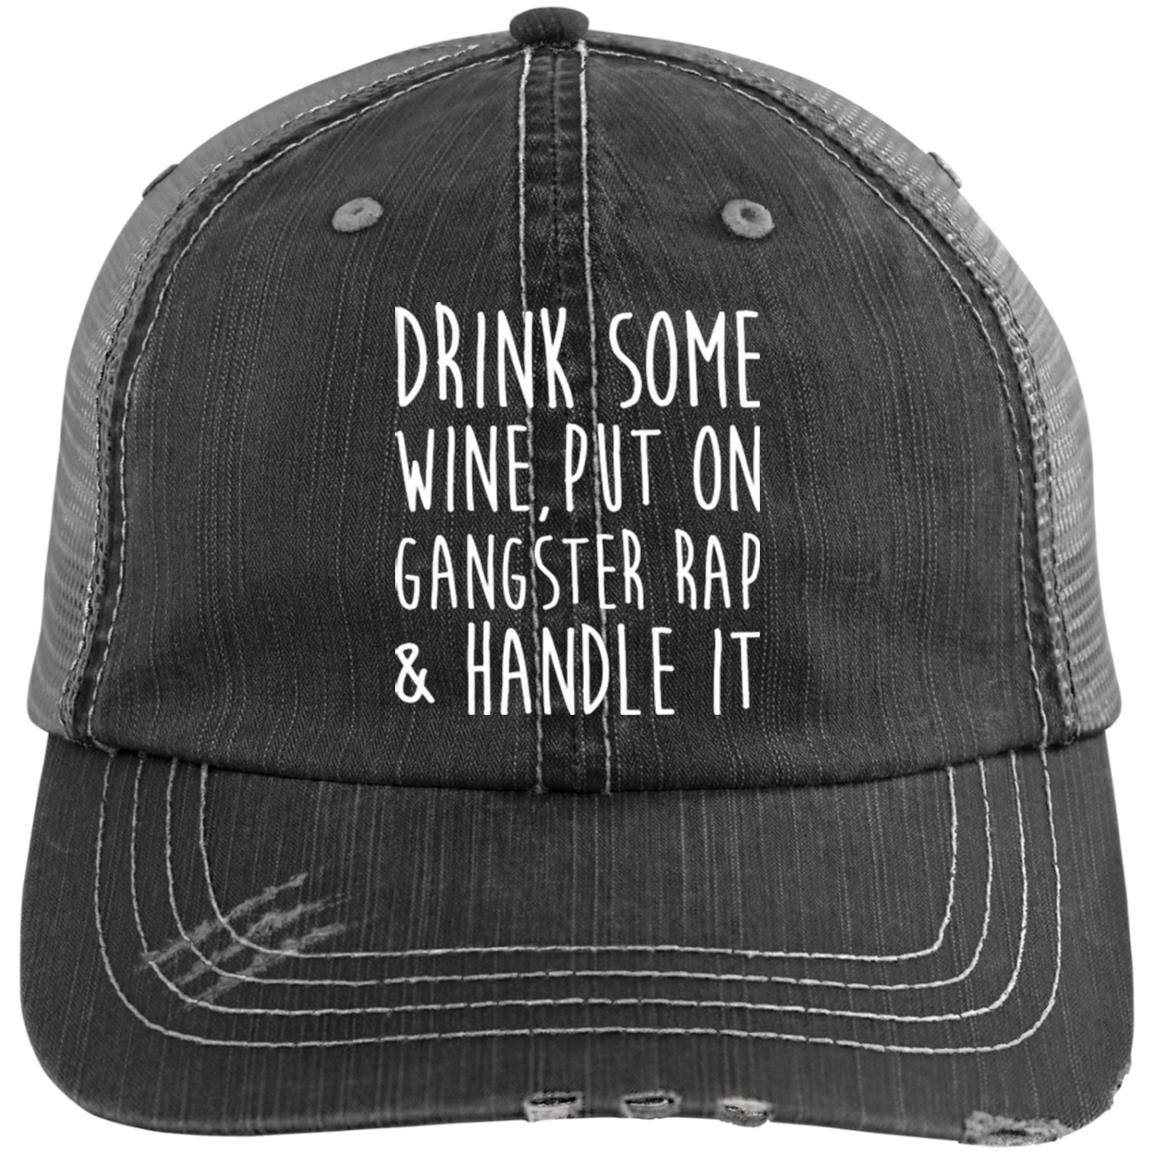 Wine and Gangster Rap - Distressed Style